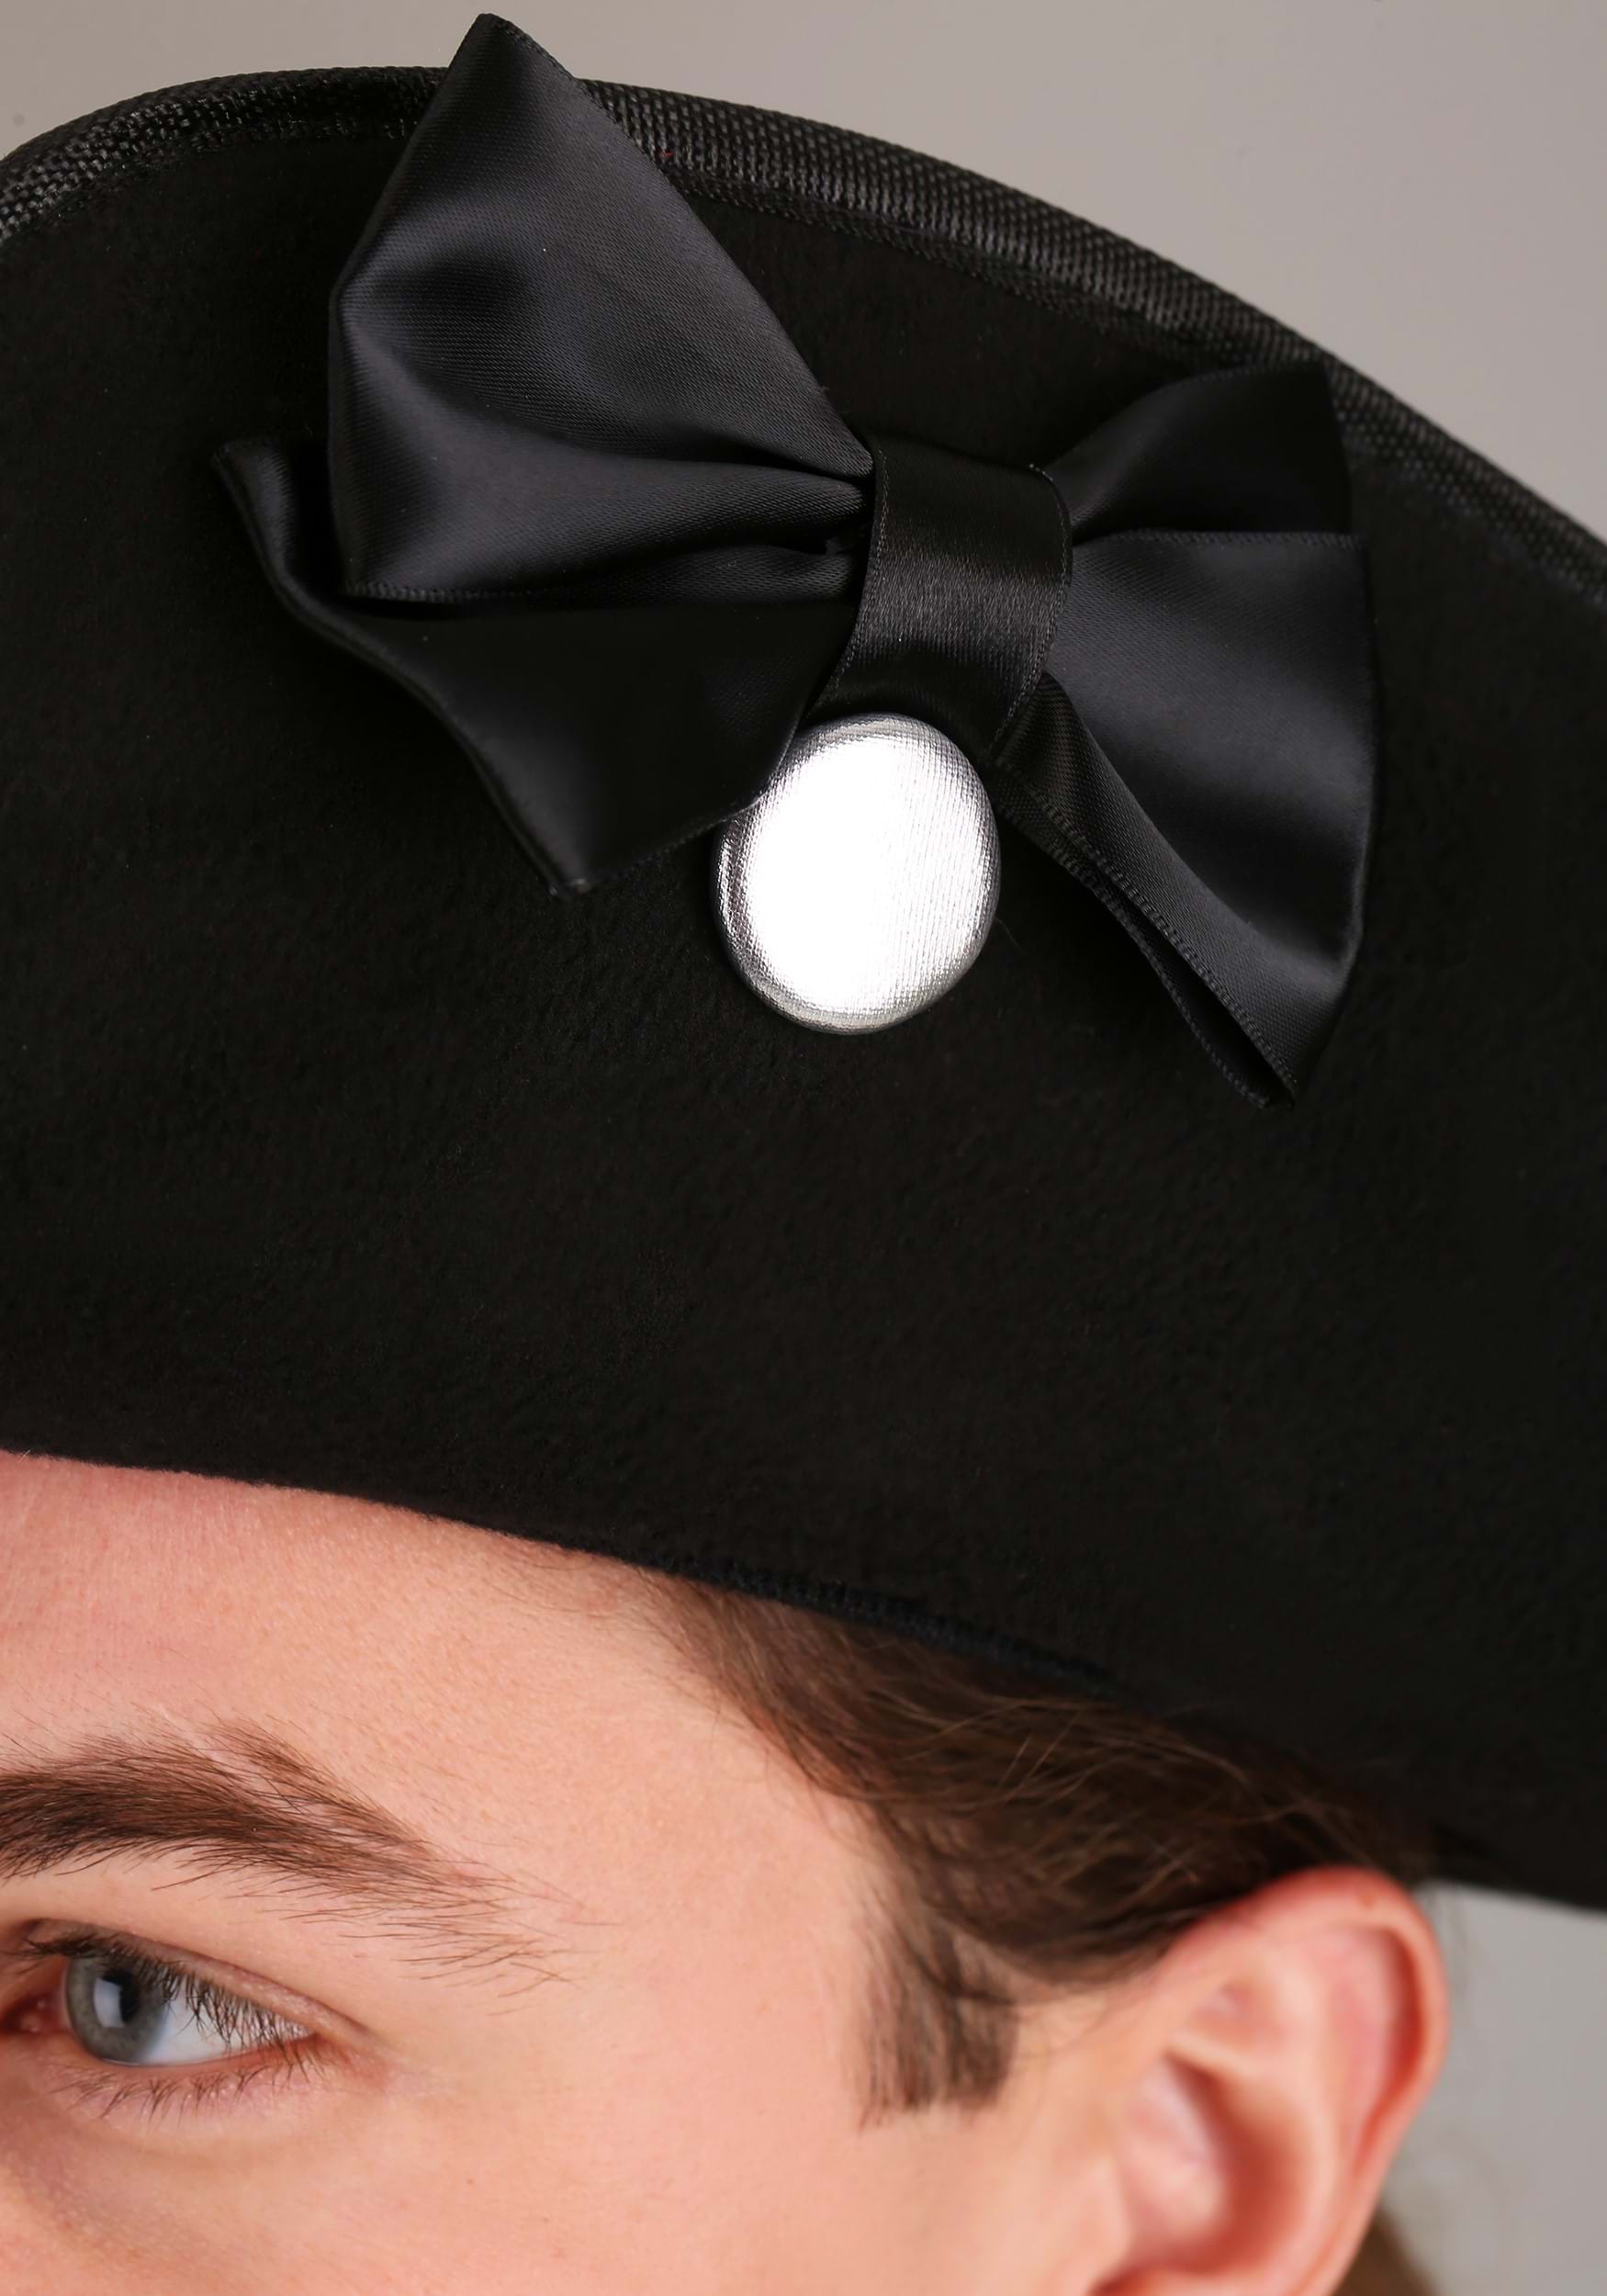 George Washington Hat For Adults